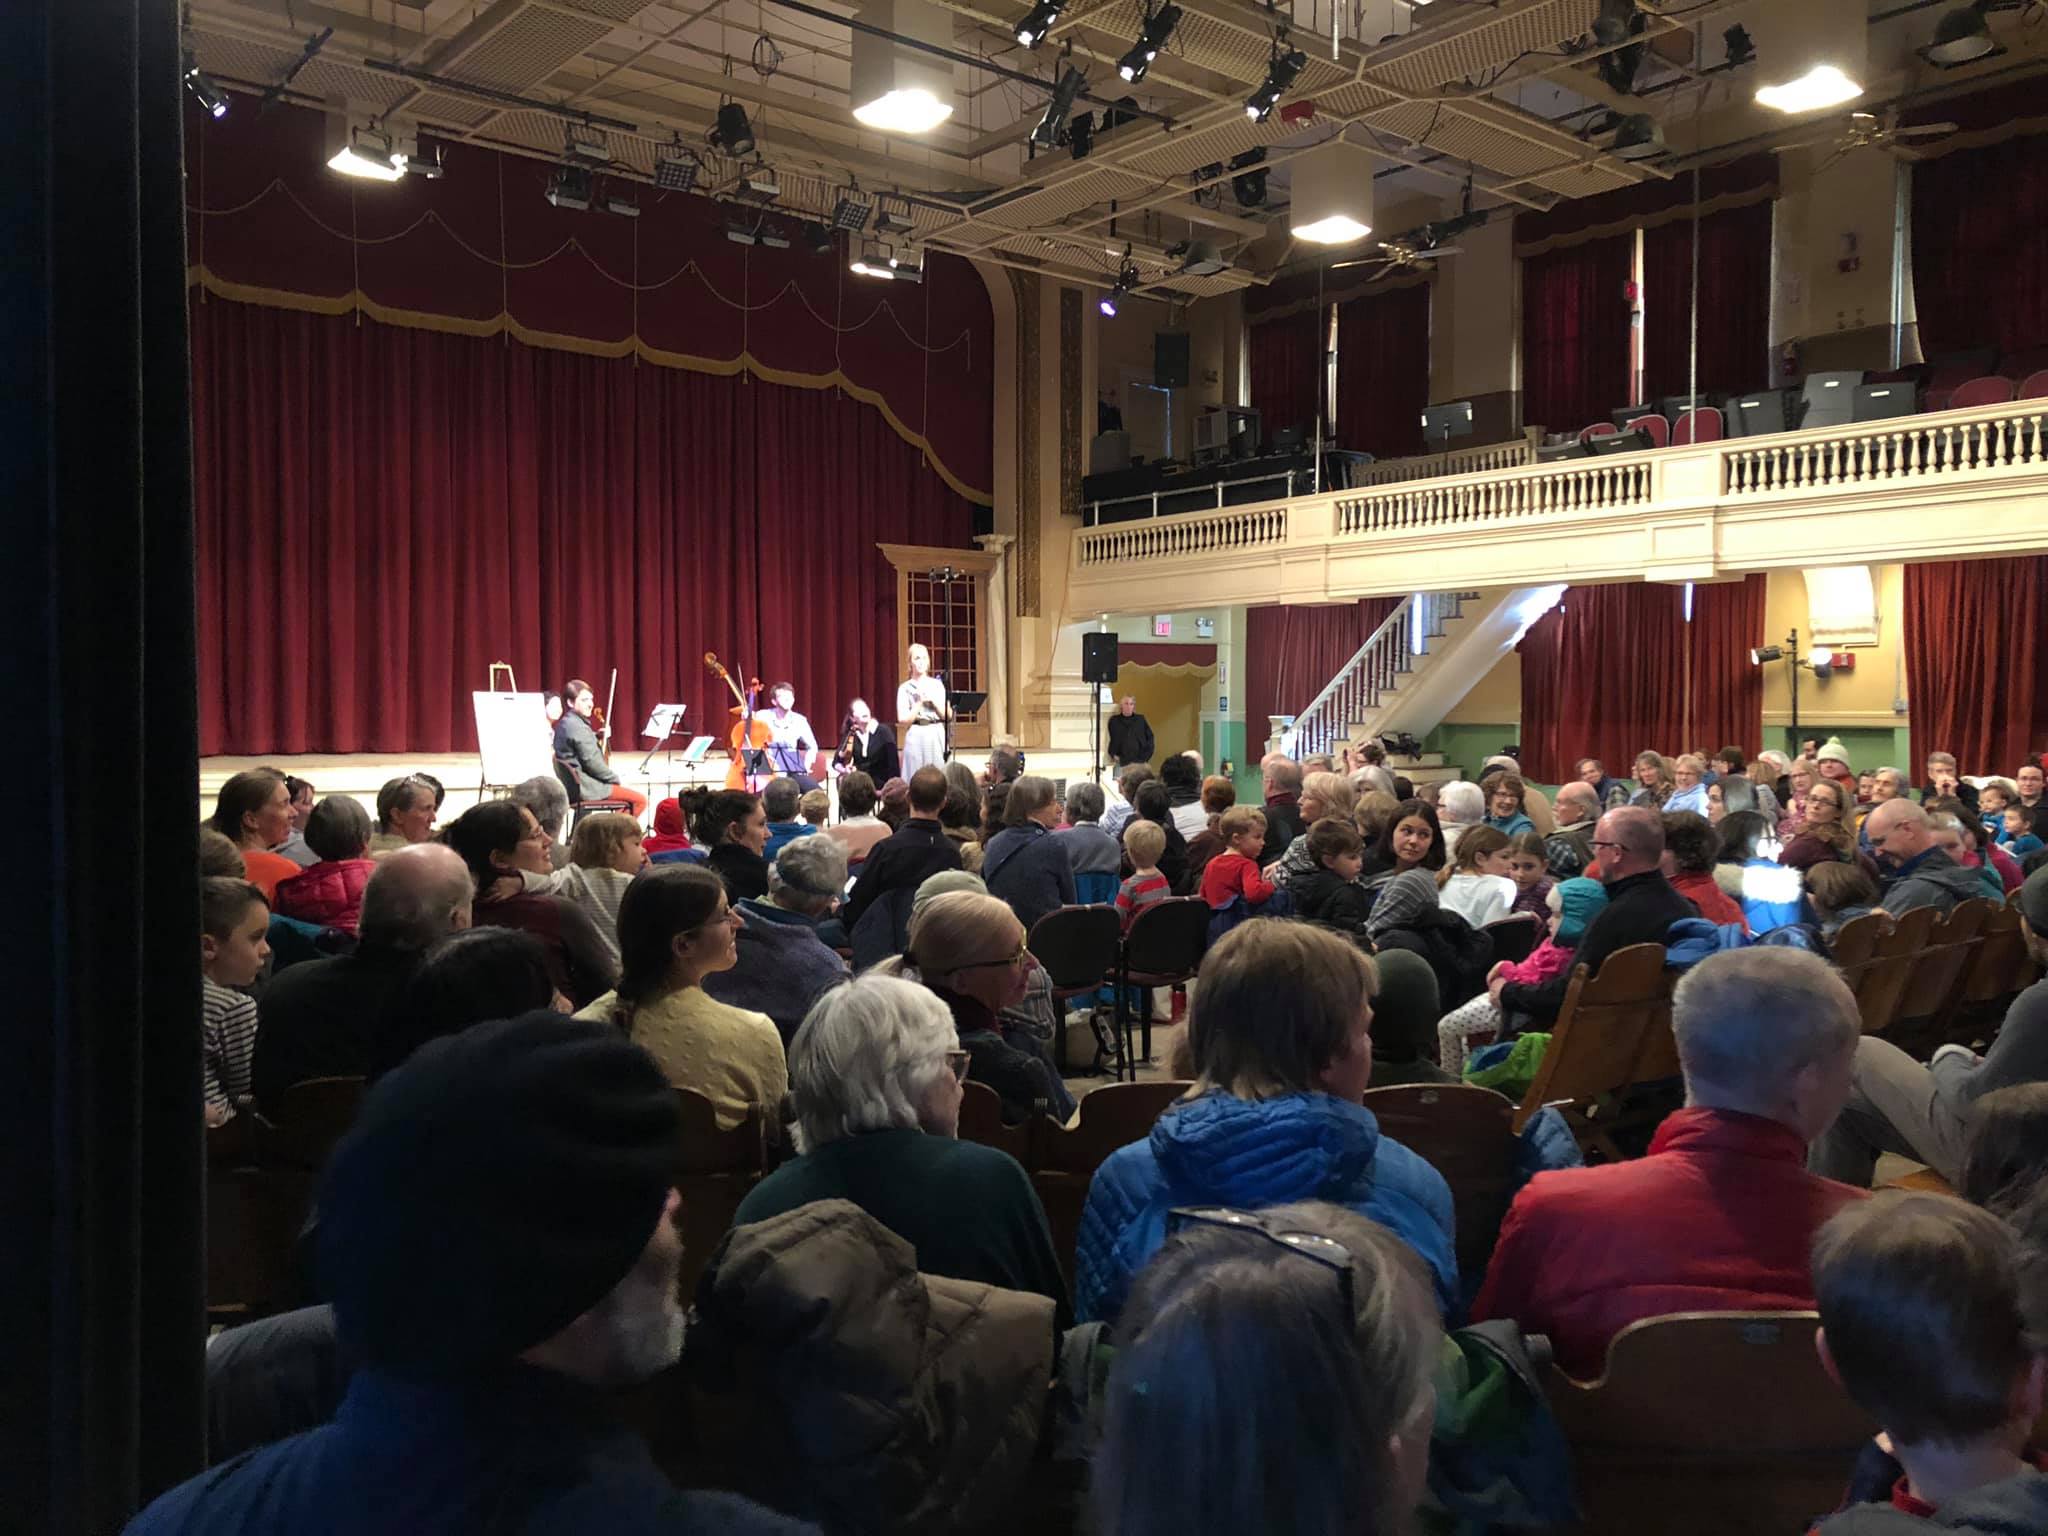 the Hall - packed for Musical Storytelling collaboration between LNT & Scrag Mountain